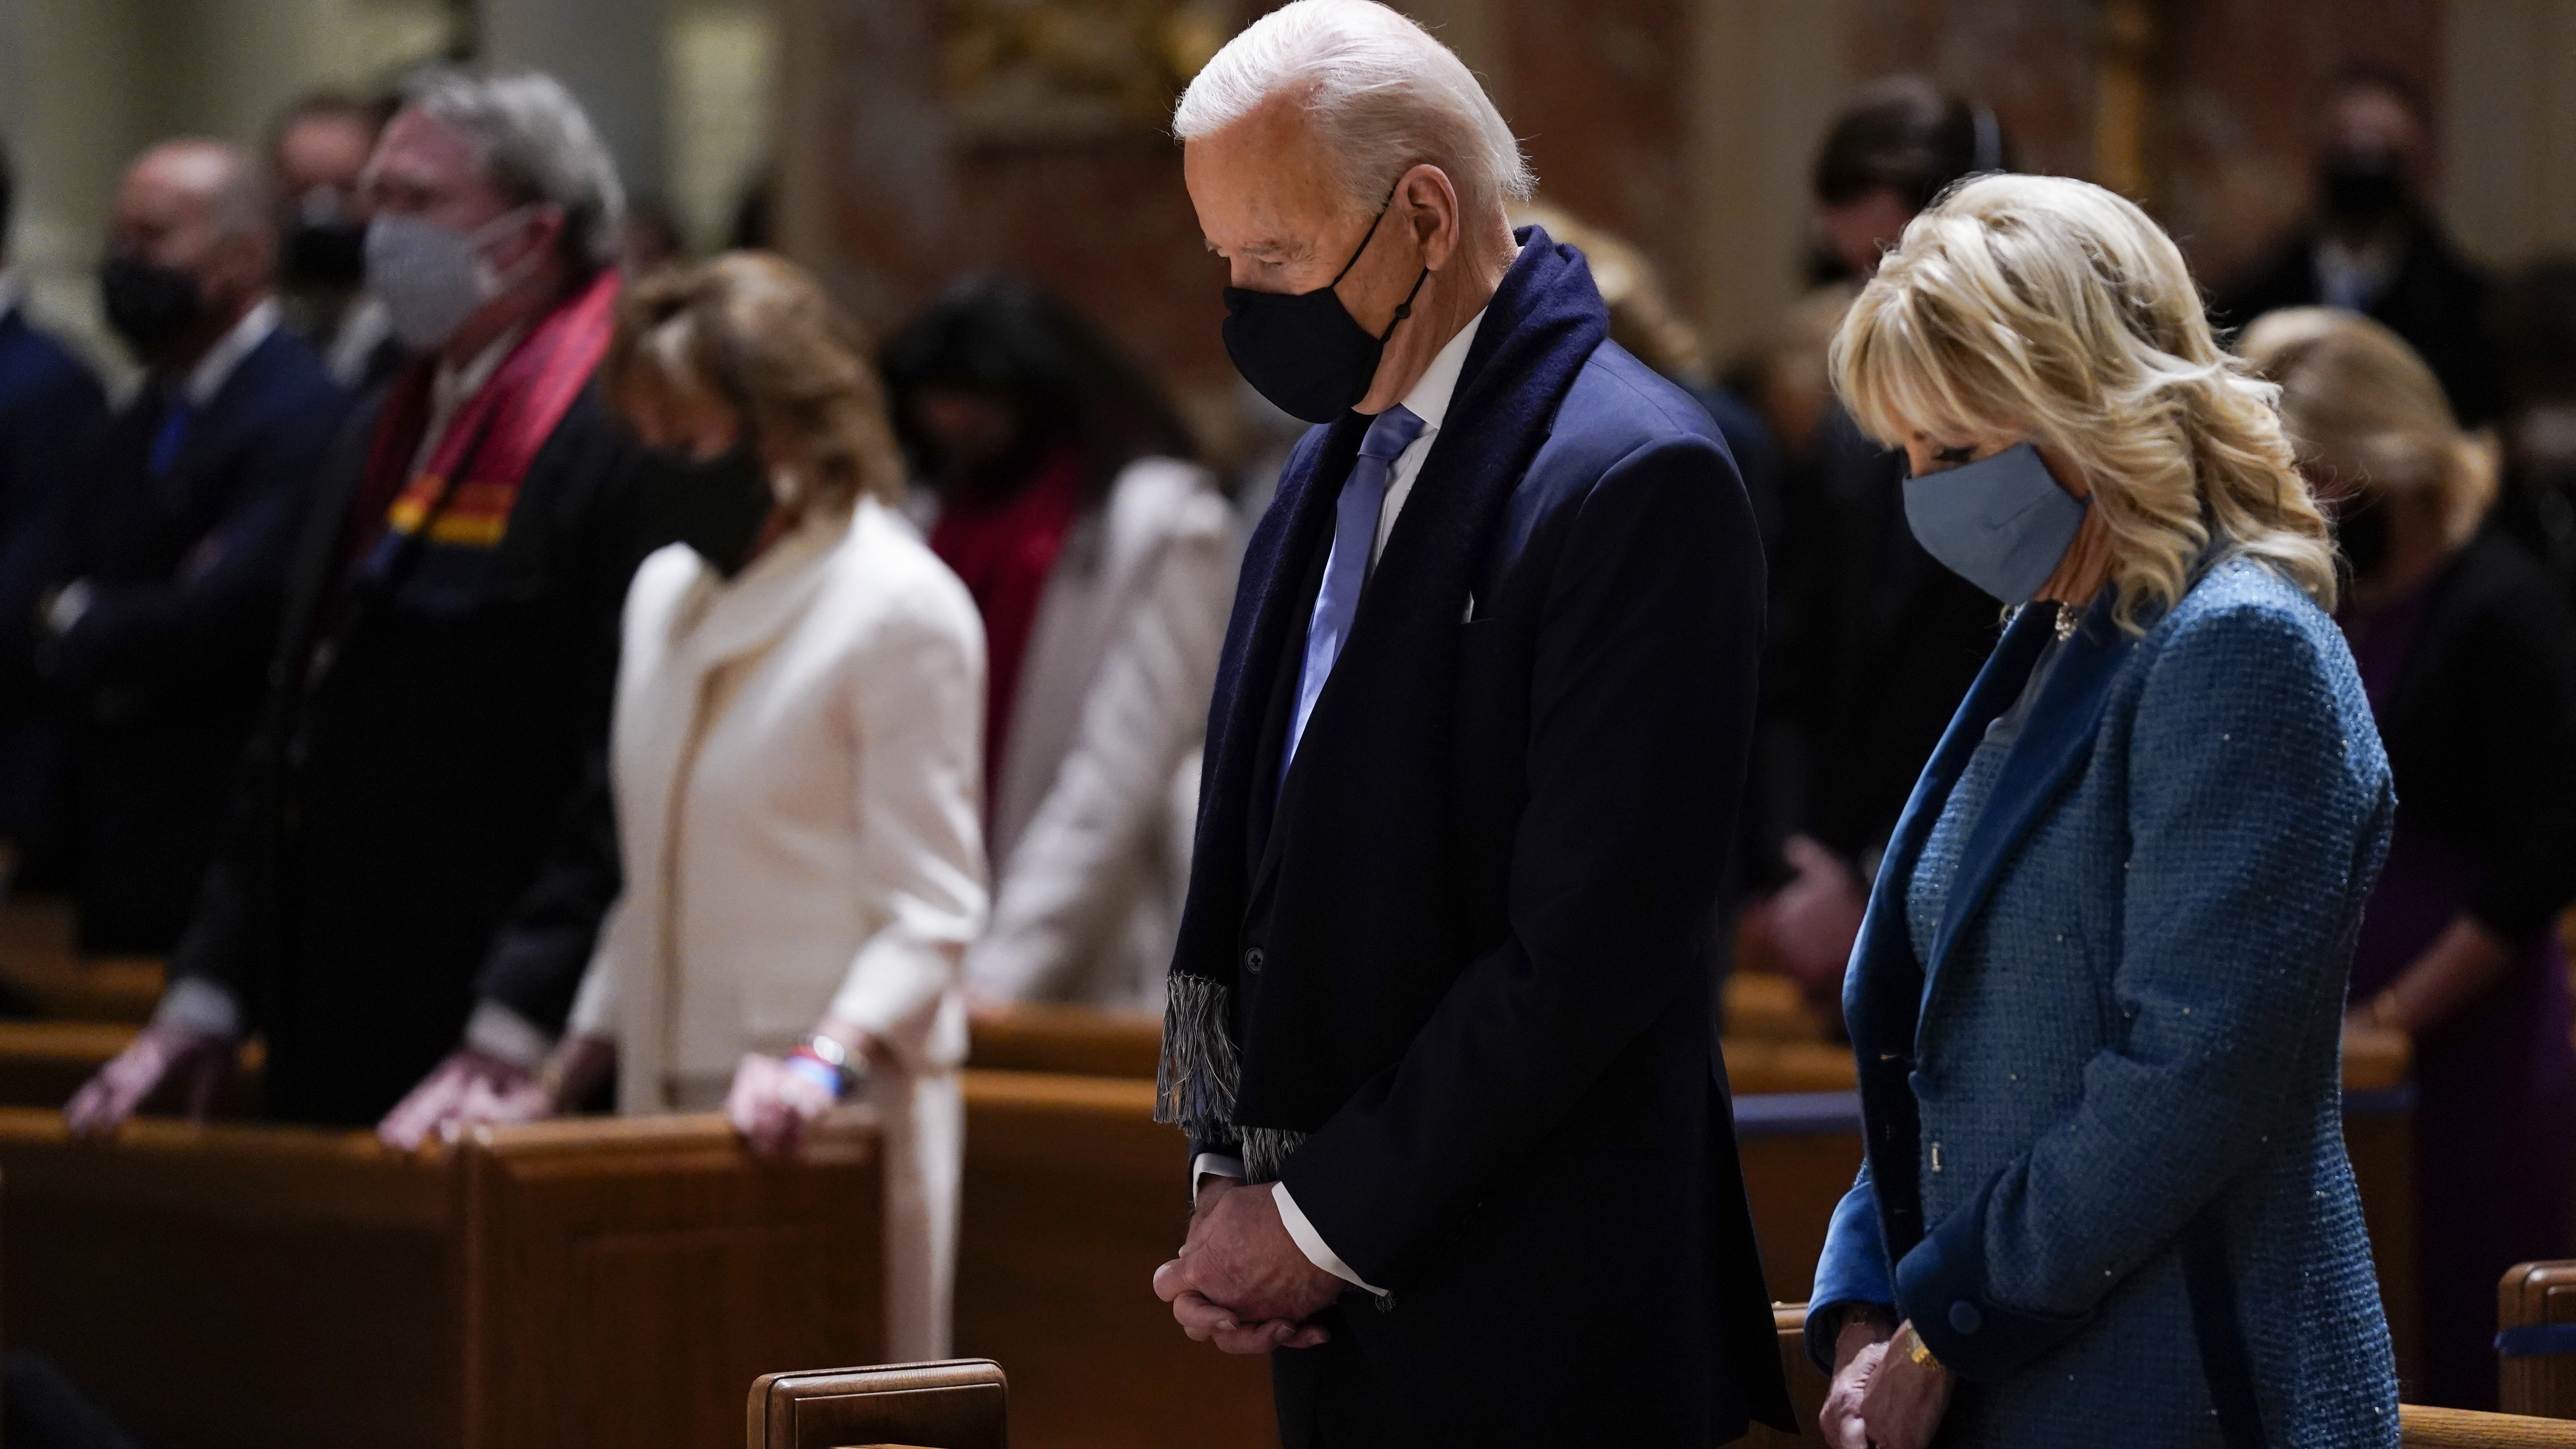 President Joe Biden and his wife, Jill Biden, shown here on Jan. 20, 2021, attend Mass at the Cathedral of St. Matthew the Apostle during Inauguration Day ceremonies in Washington, D.C. CREDIT: Evan Vucci/AP